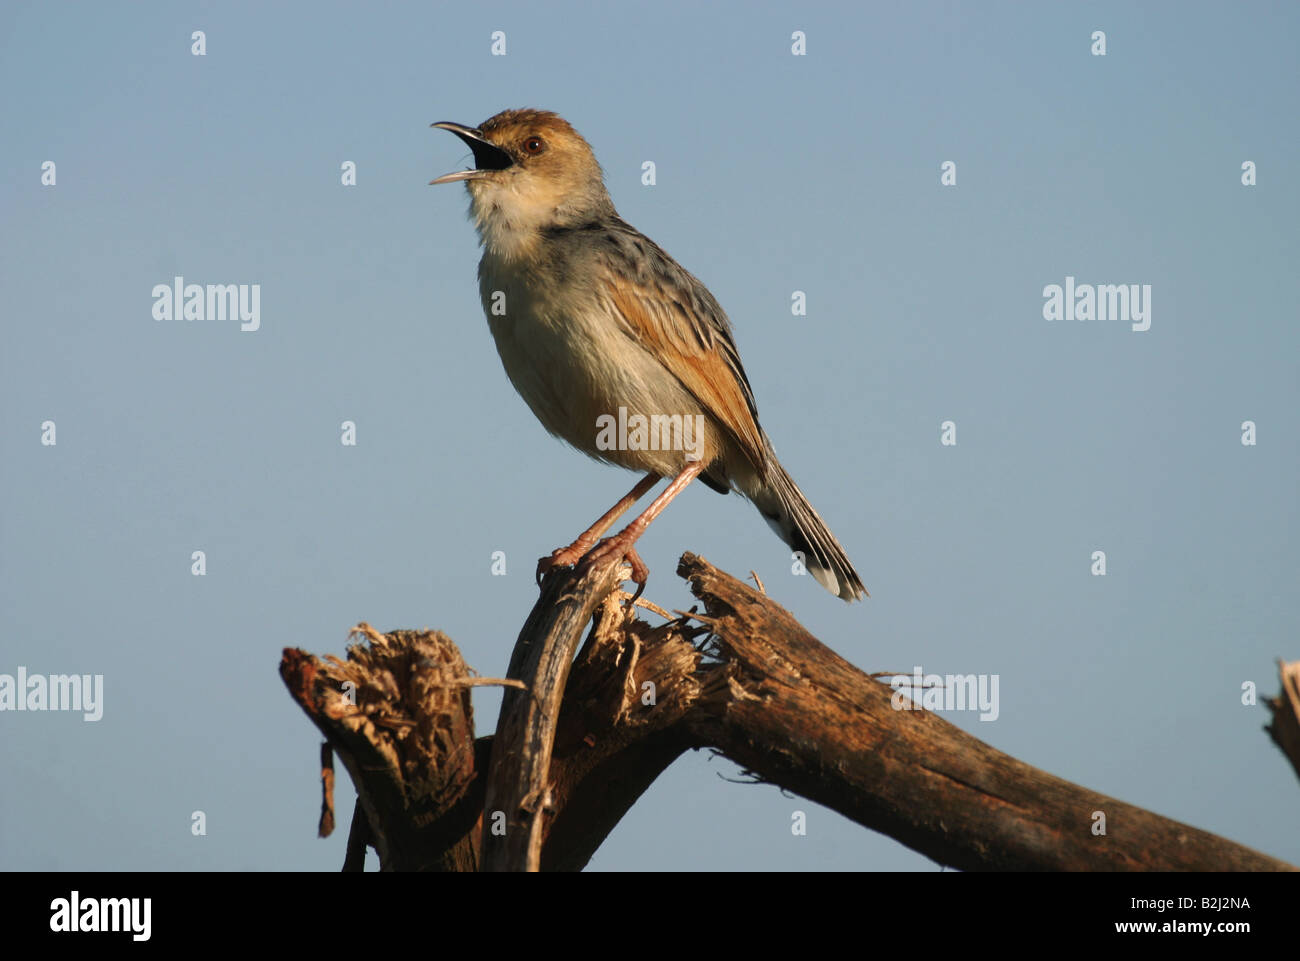 zoology / animals, avian / bird, Sedge Warbler, (Acrocephalus schoenobaenus), singing, sitting on branch, 'Amboseli Nationalpark', Kenya, distribution: Europe, Russia, Middle East, Additional-Rights-Clearance-Info-Not-Available Stock Photo